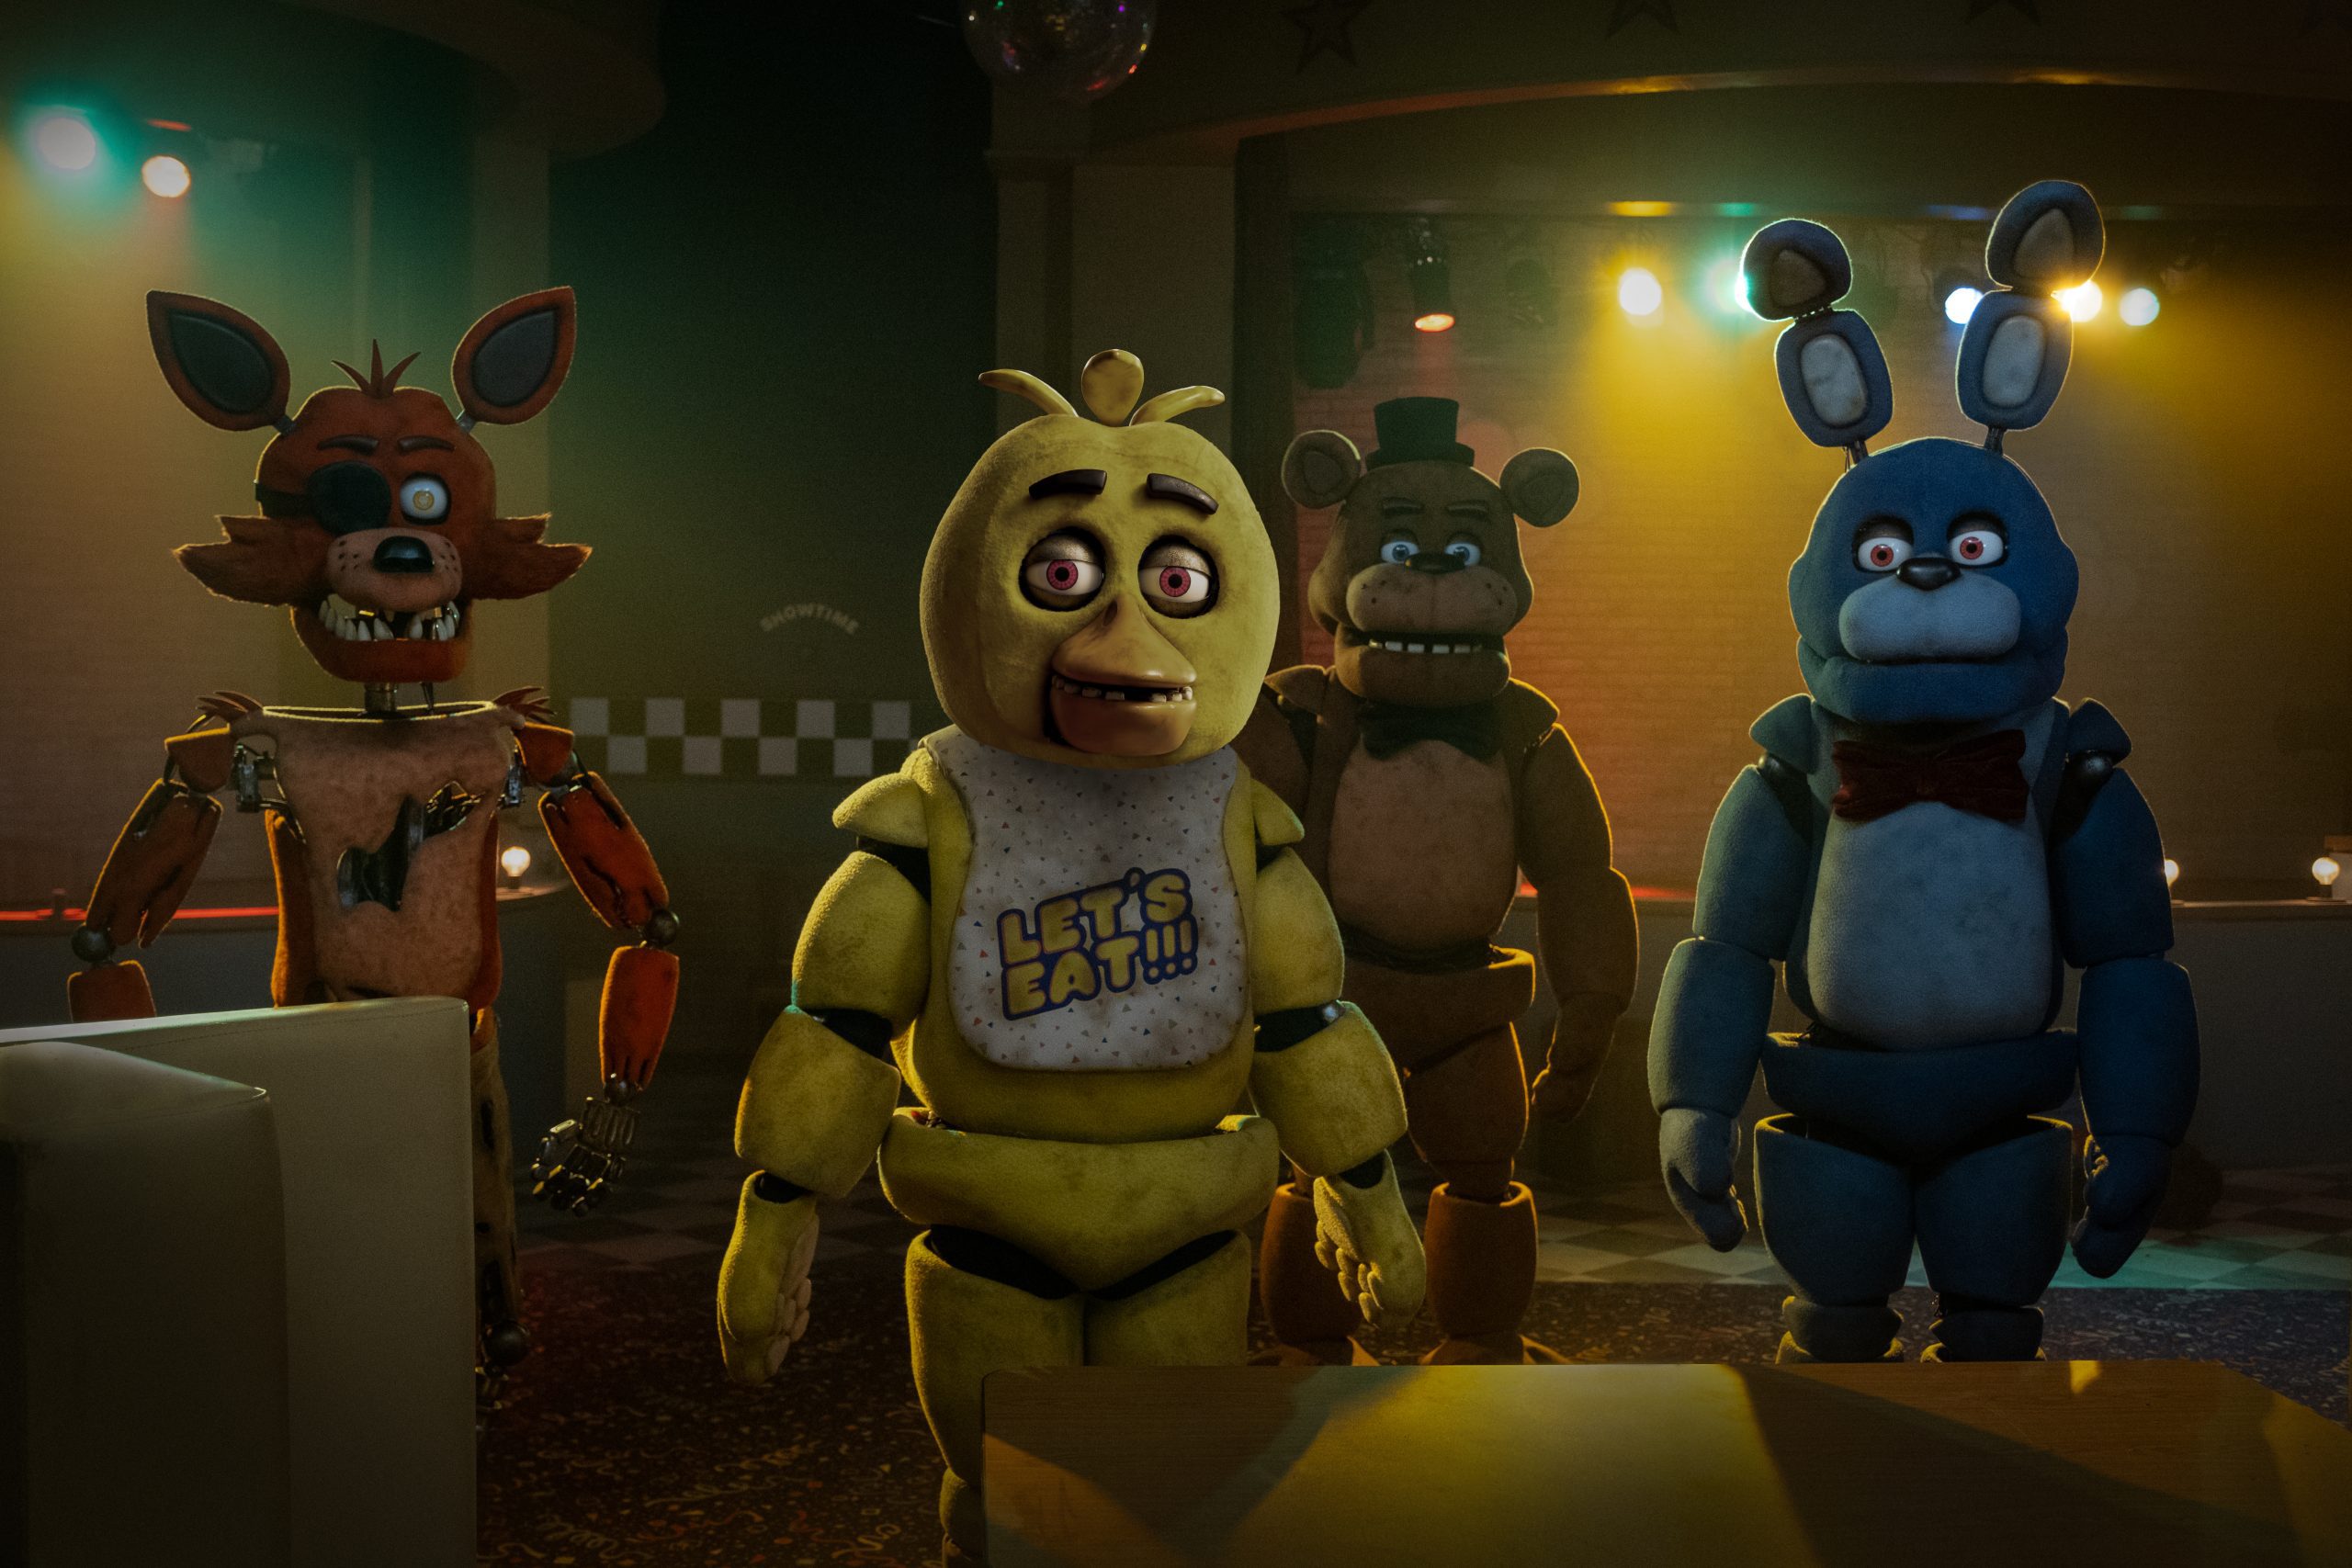 ‘Five Nights at Freddy’s’: A Lukewarm Slice of Horror